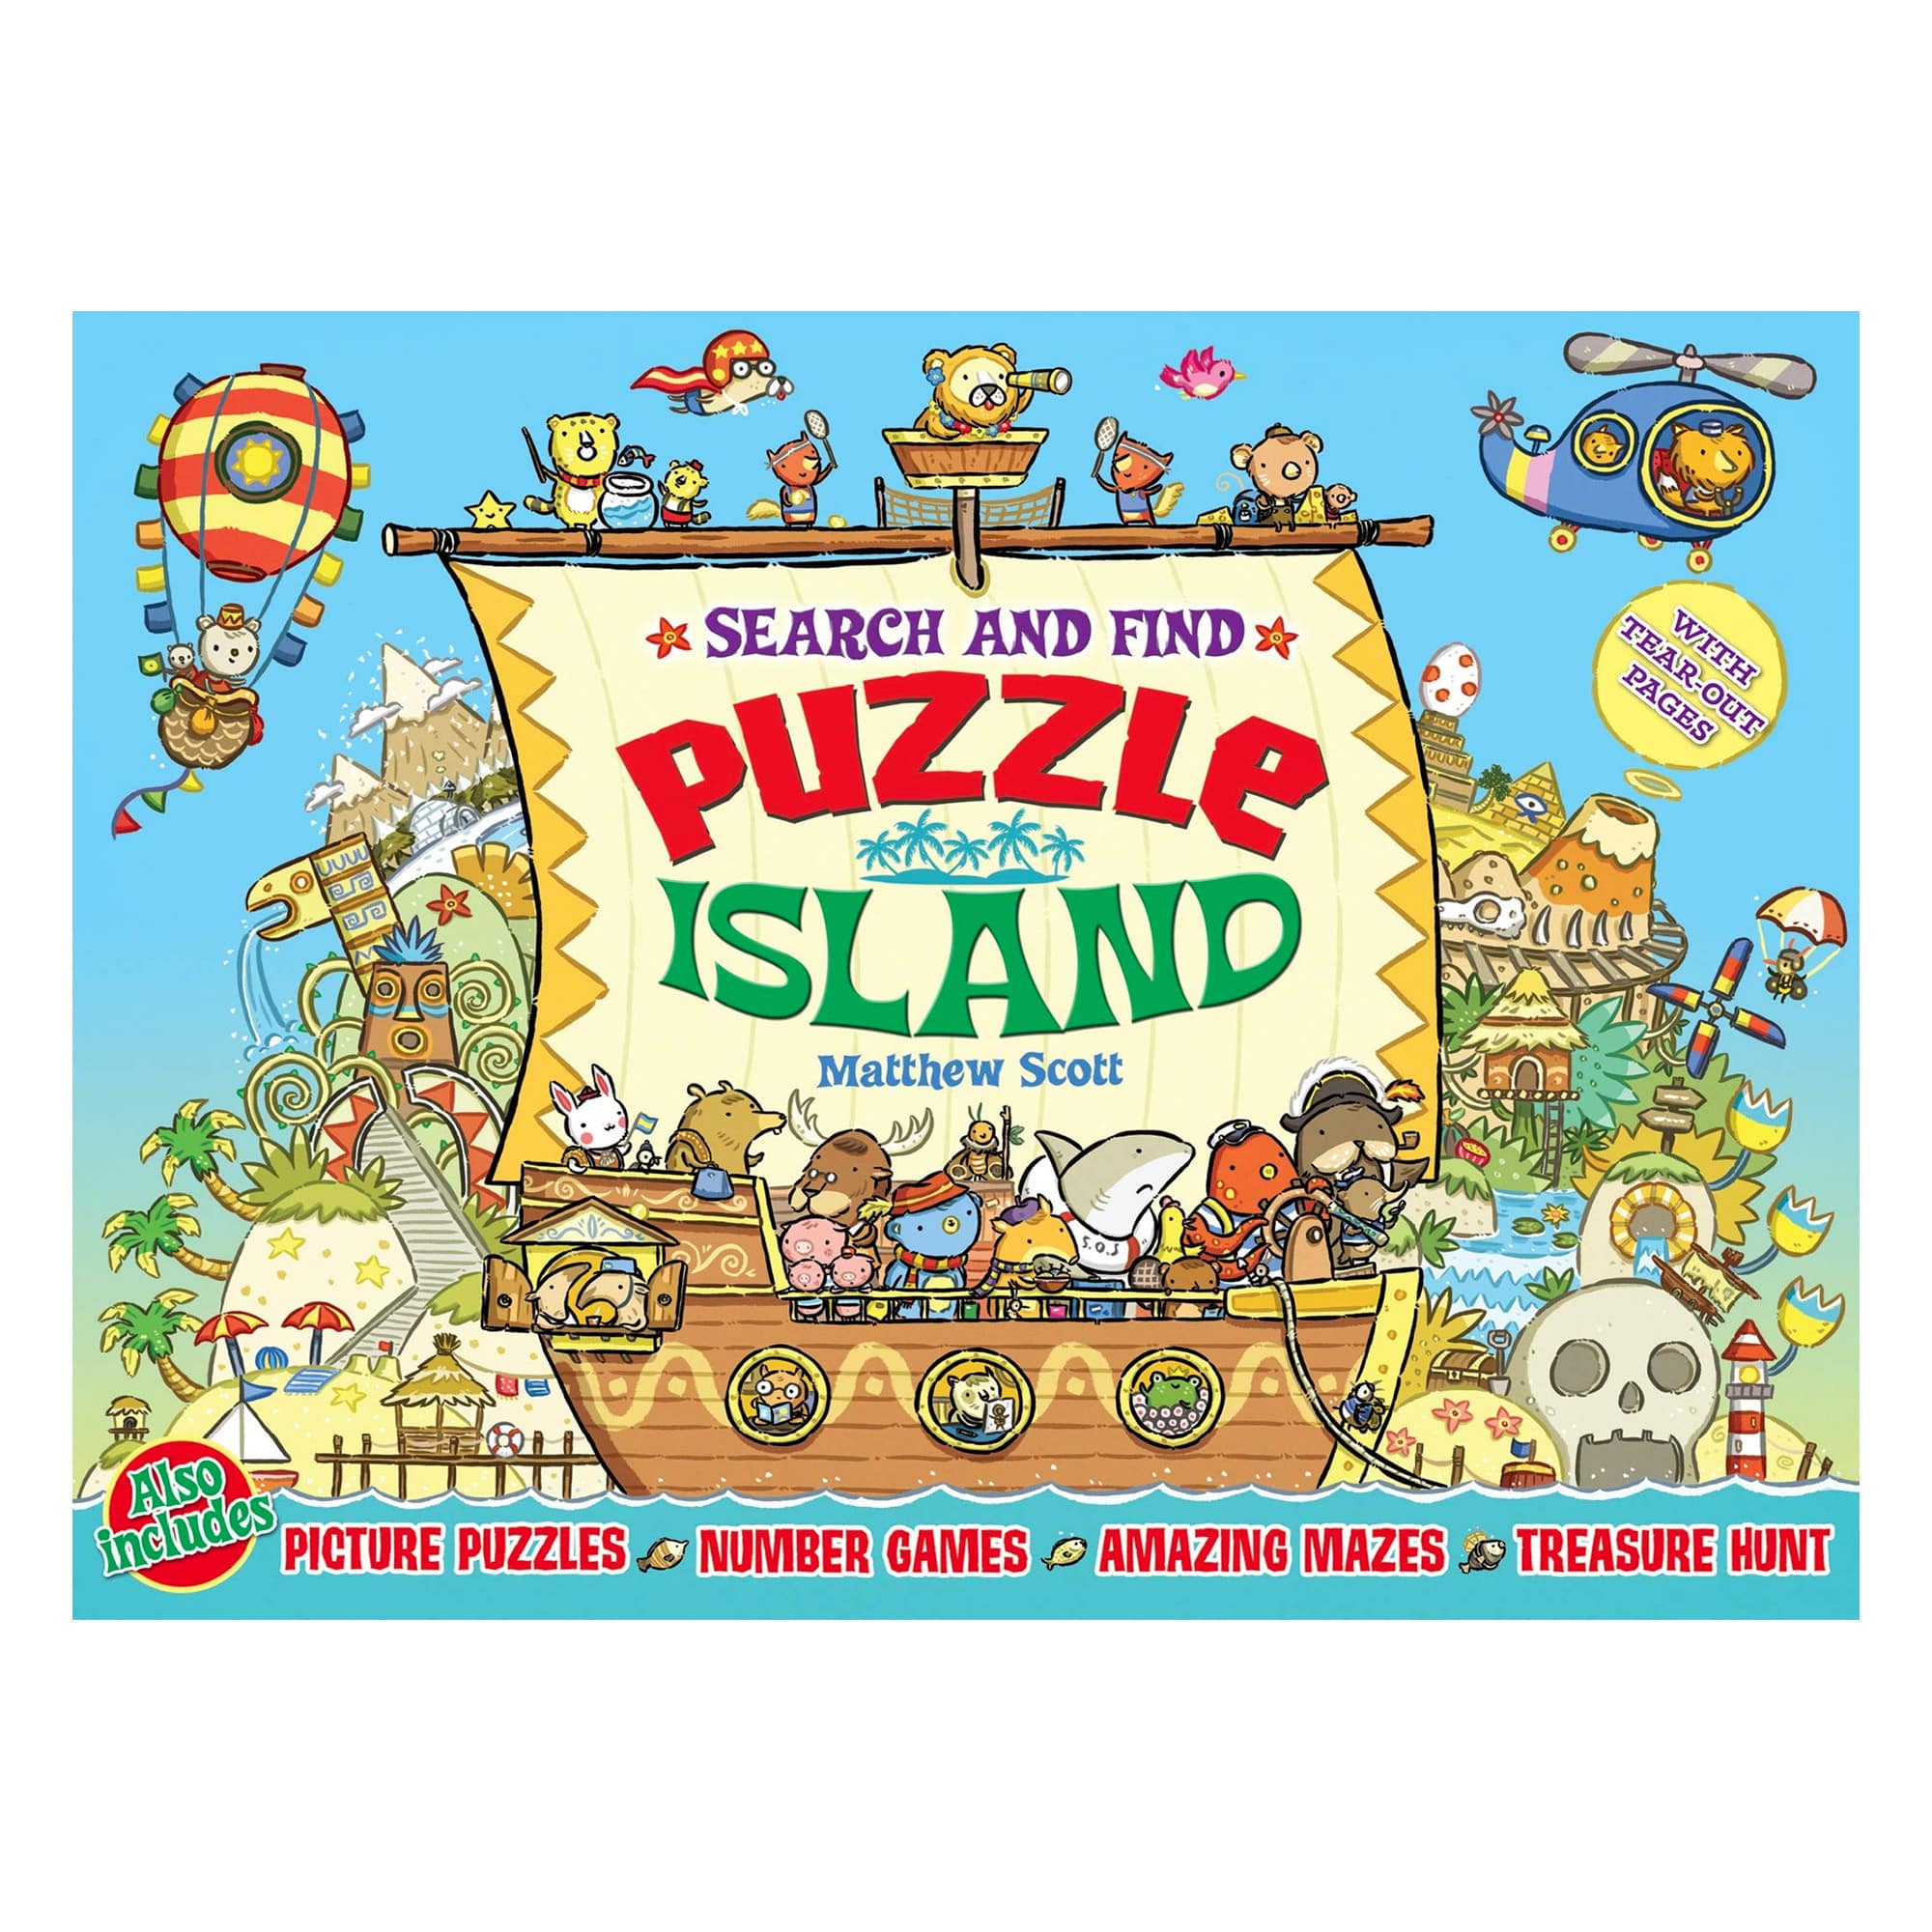 Search and Find - Puzzle Island by Matthew Scott